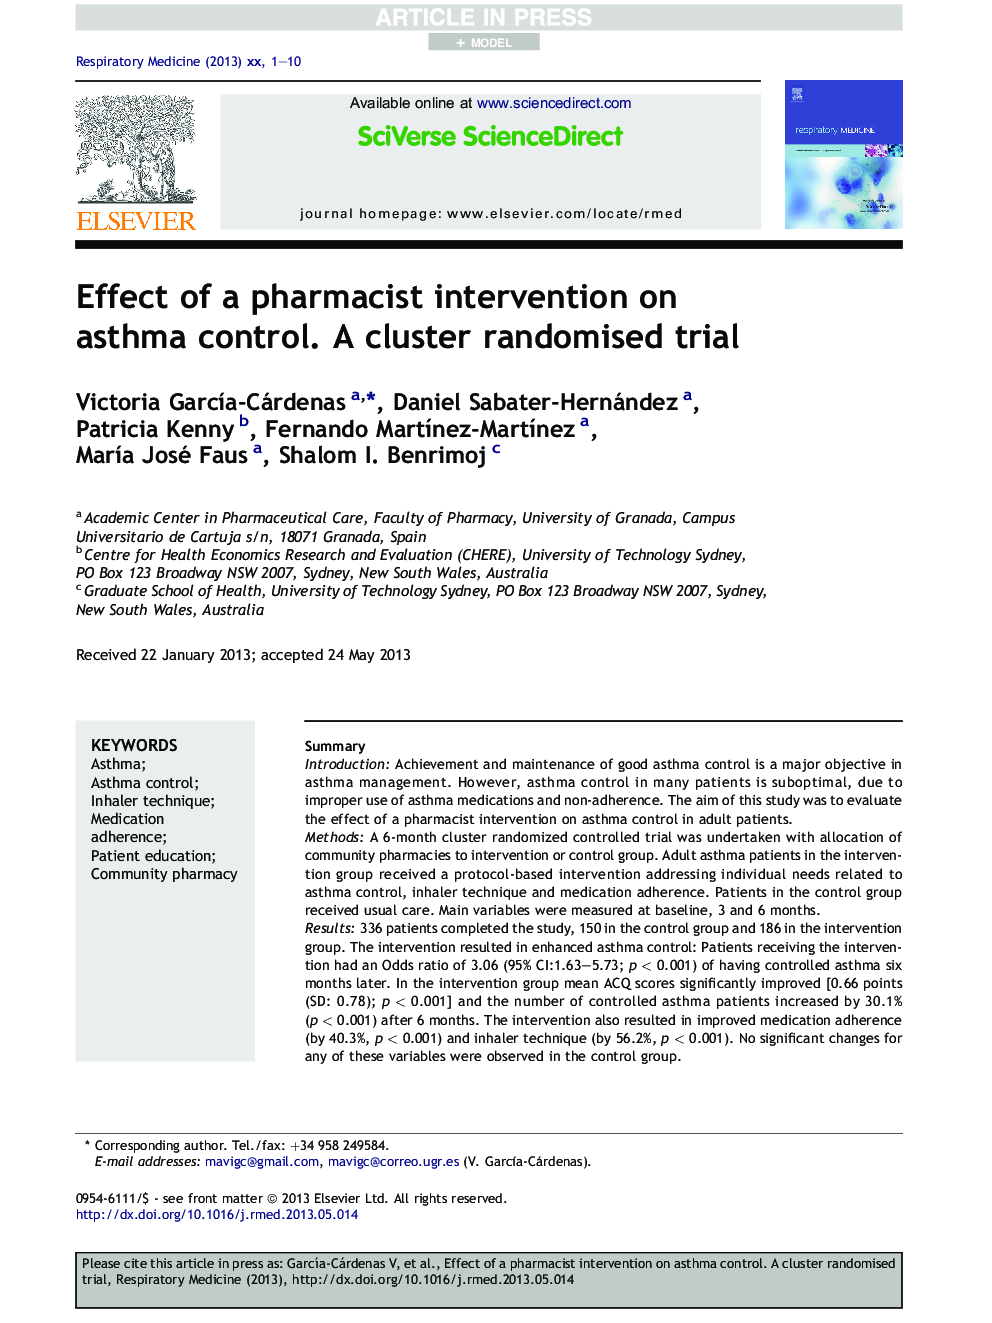 Effect of a pharmacist intervention on asthma control. A cluster randomised trial